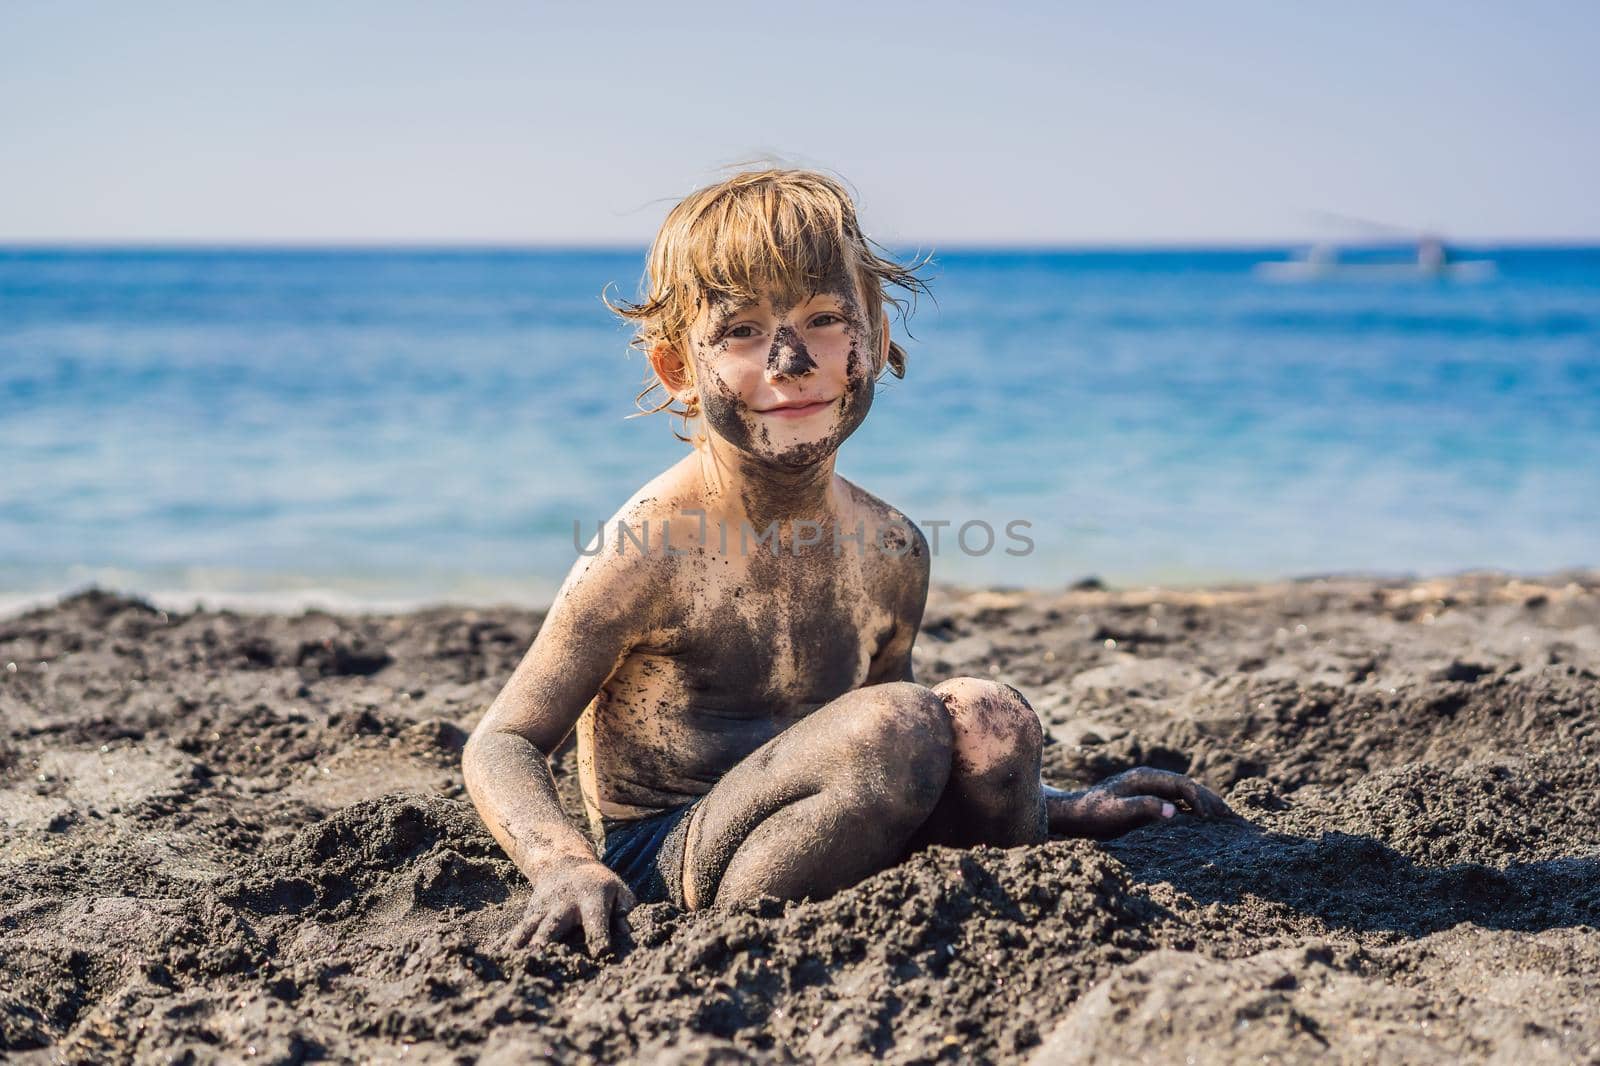 Black Friday concept. Smiling boy with dirty Black face sitting and playing on black sand sea beach before swimming in ocean. Family active lifestyle, and water leisure on summer vacation with kids. Black Friday, sales of tours and airline tickets or goods by galitskaya